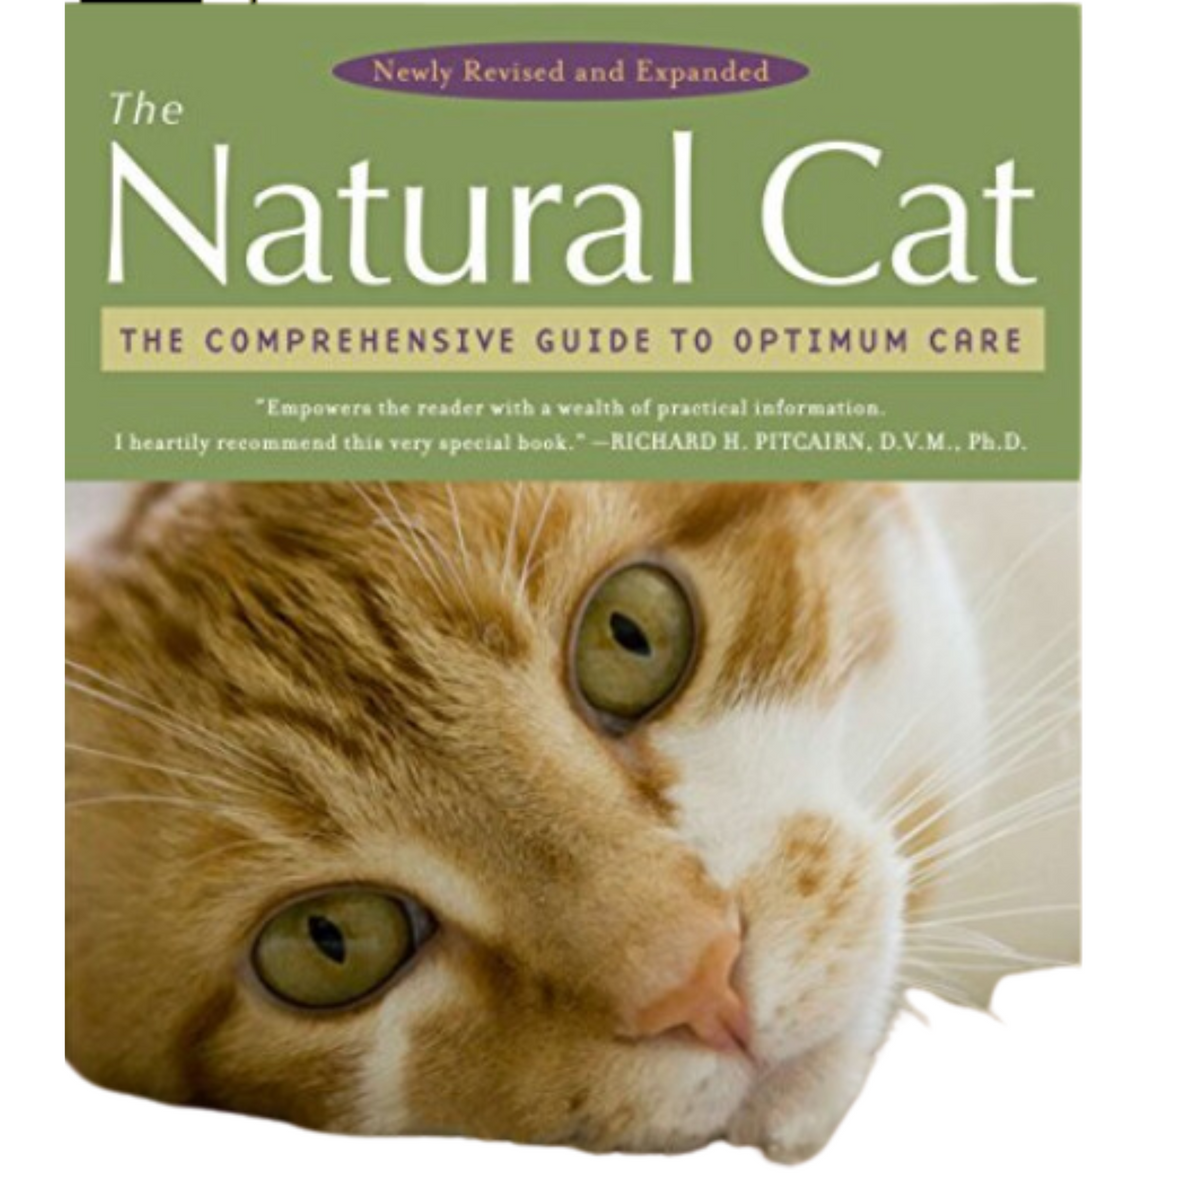 The Natural Cat Book by Anitra Frazier